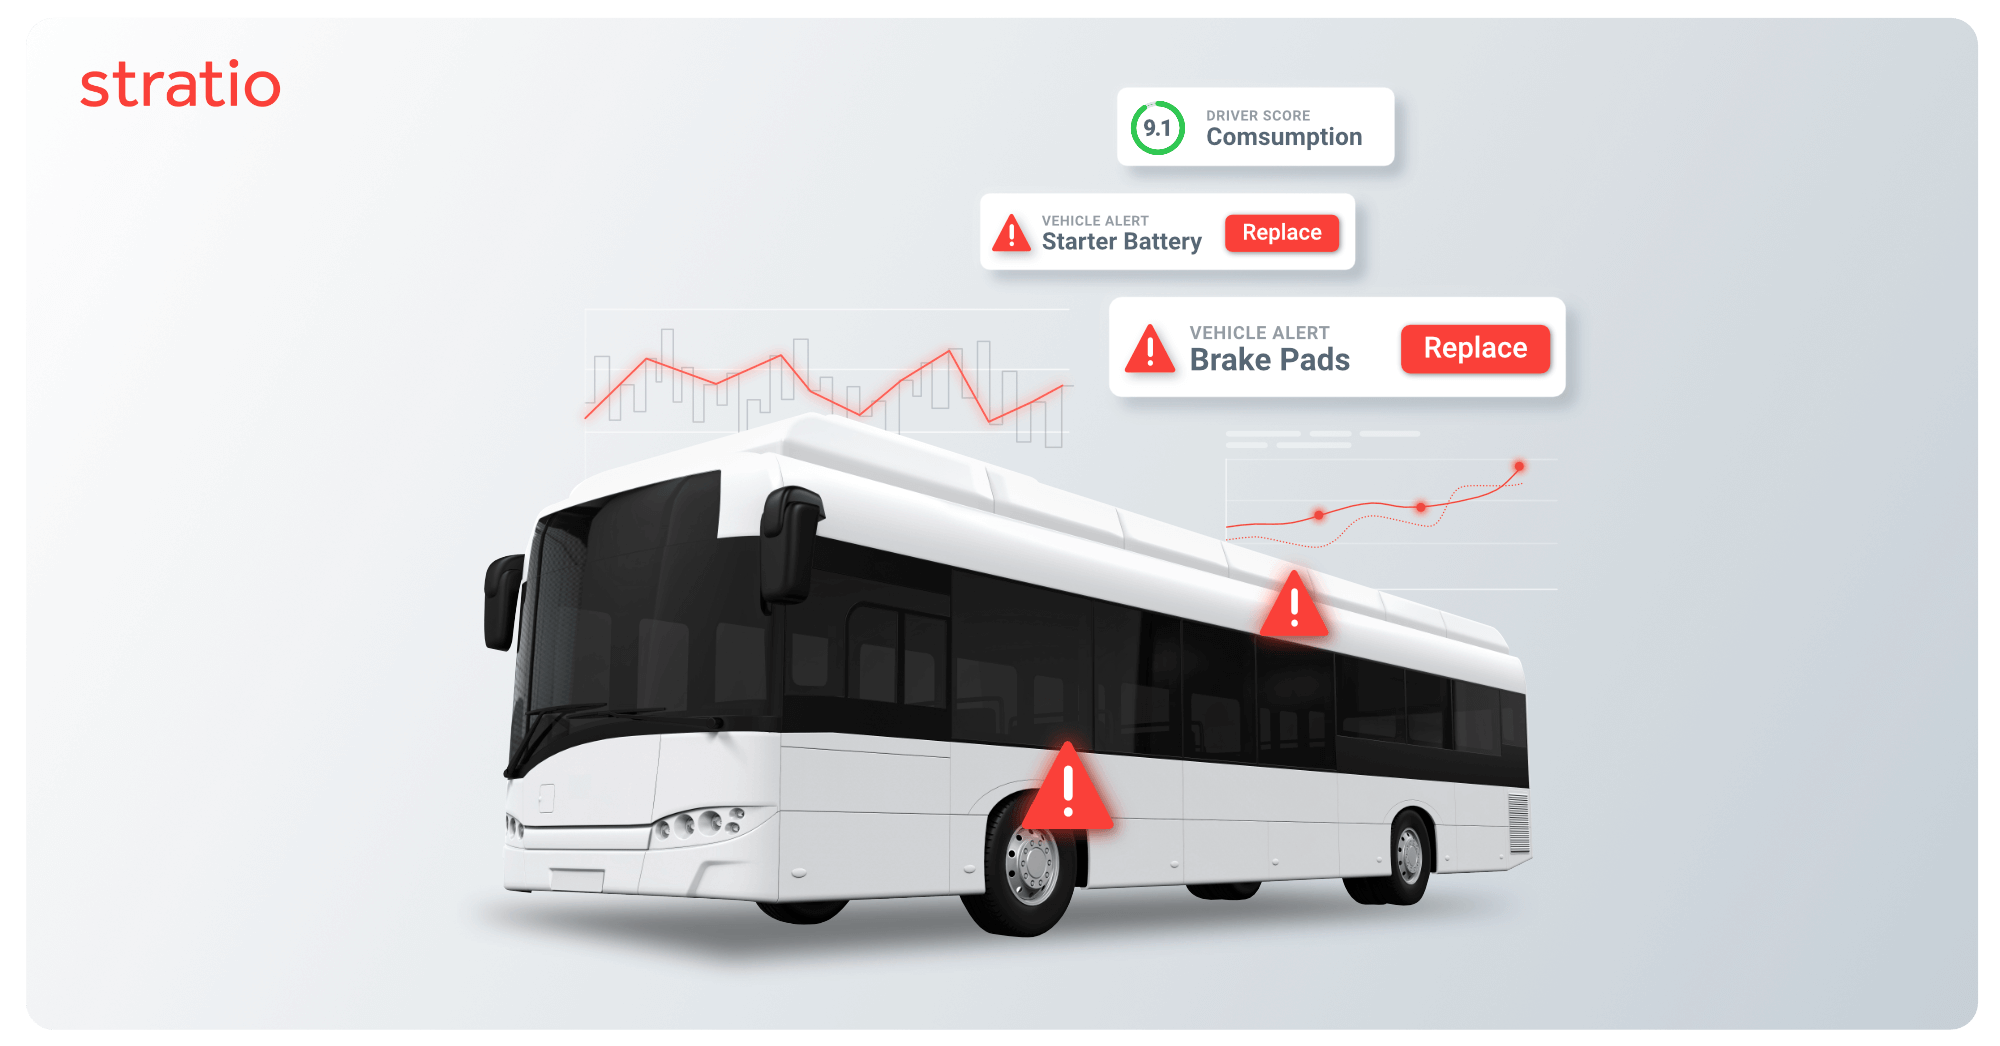 A bus equipped with predictive maintenance